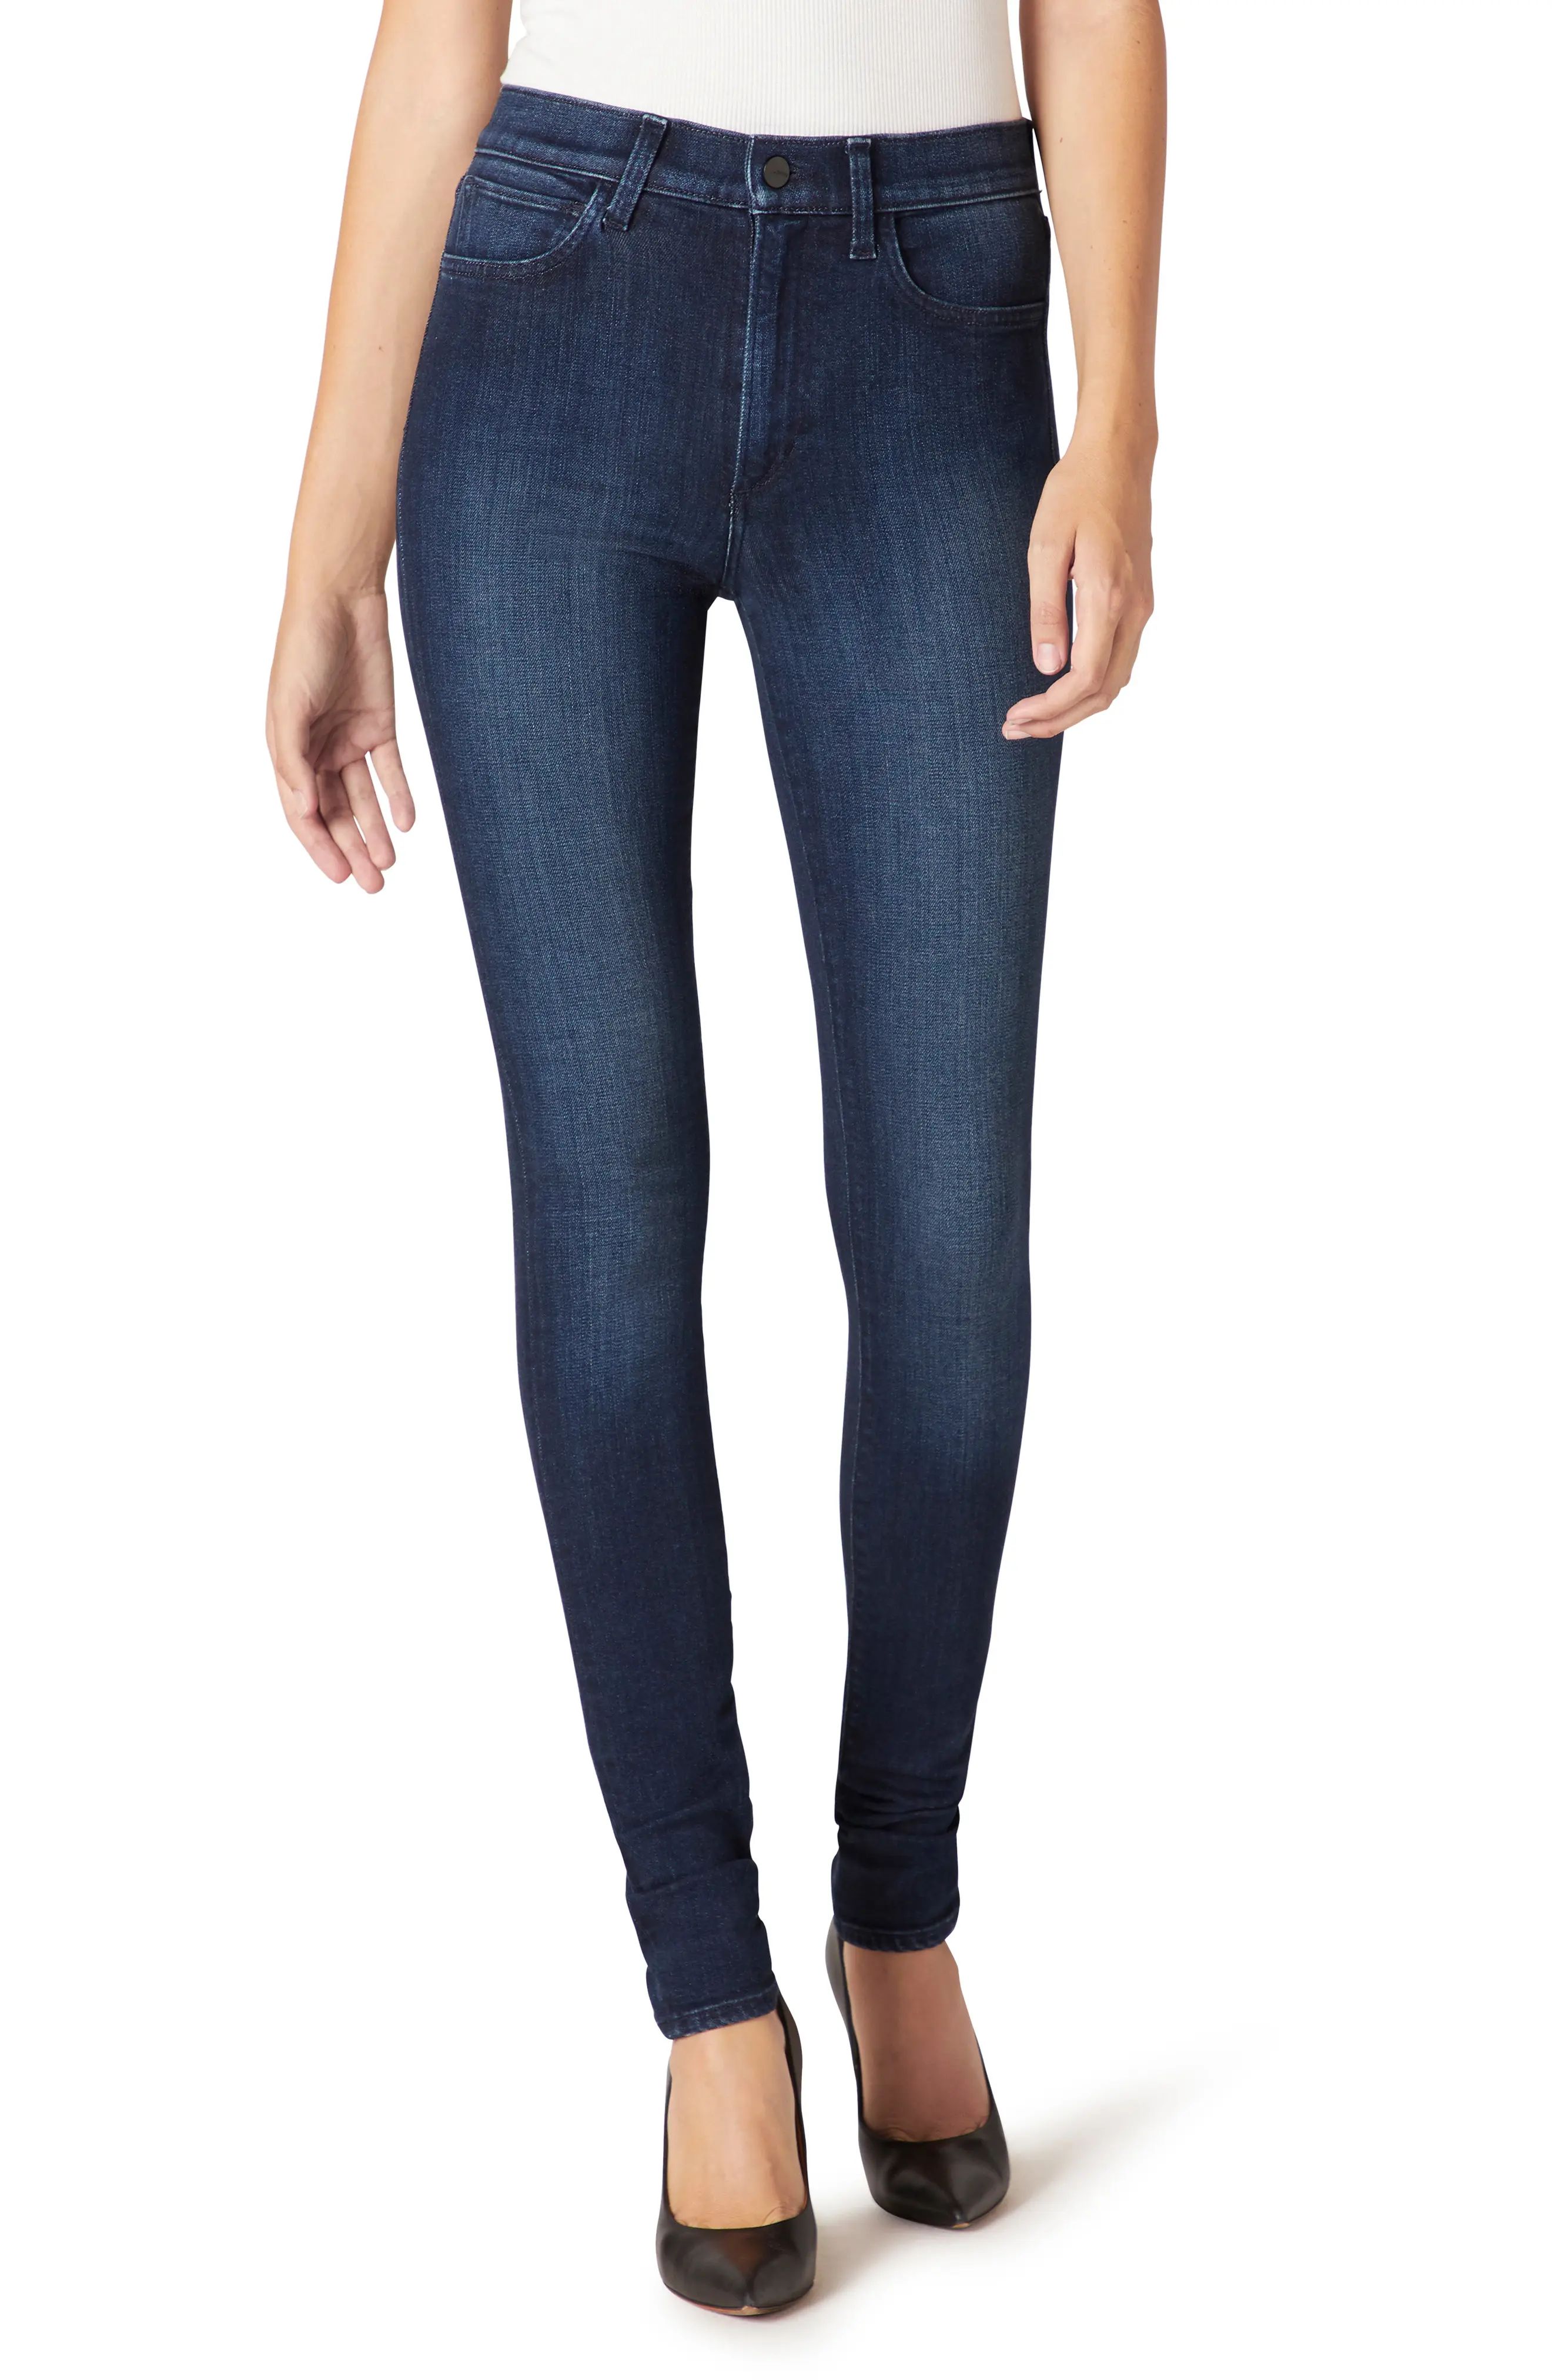 Joe's The Twiggy High Waist Long Skinny Jeans in Lupe at Nordstrom, Size 26 | Nordstrom